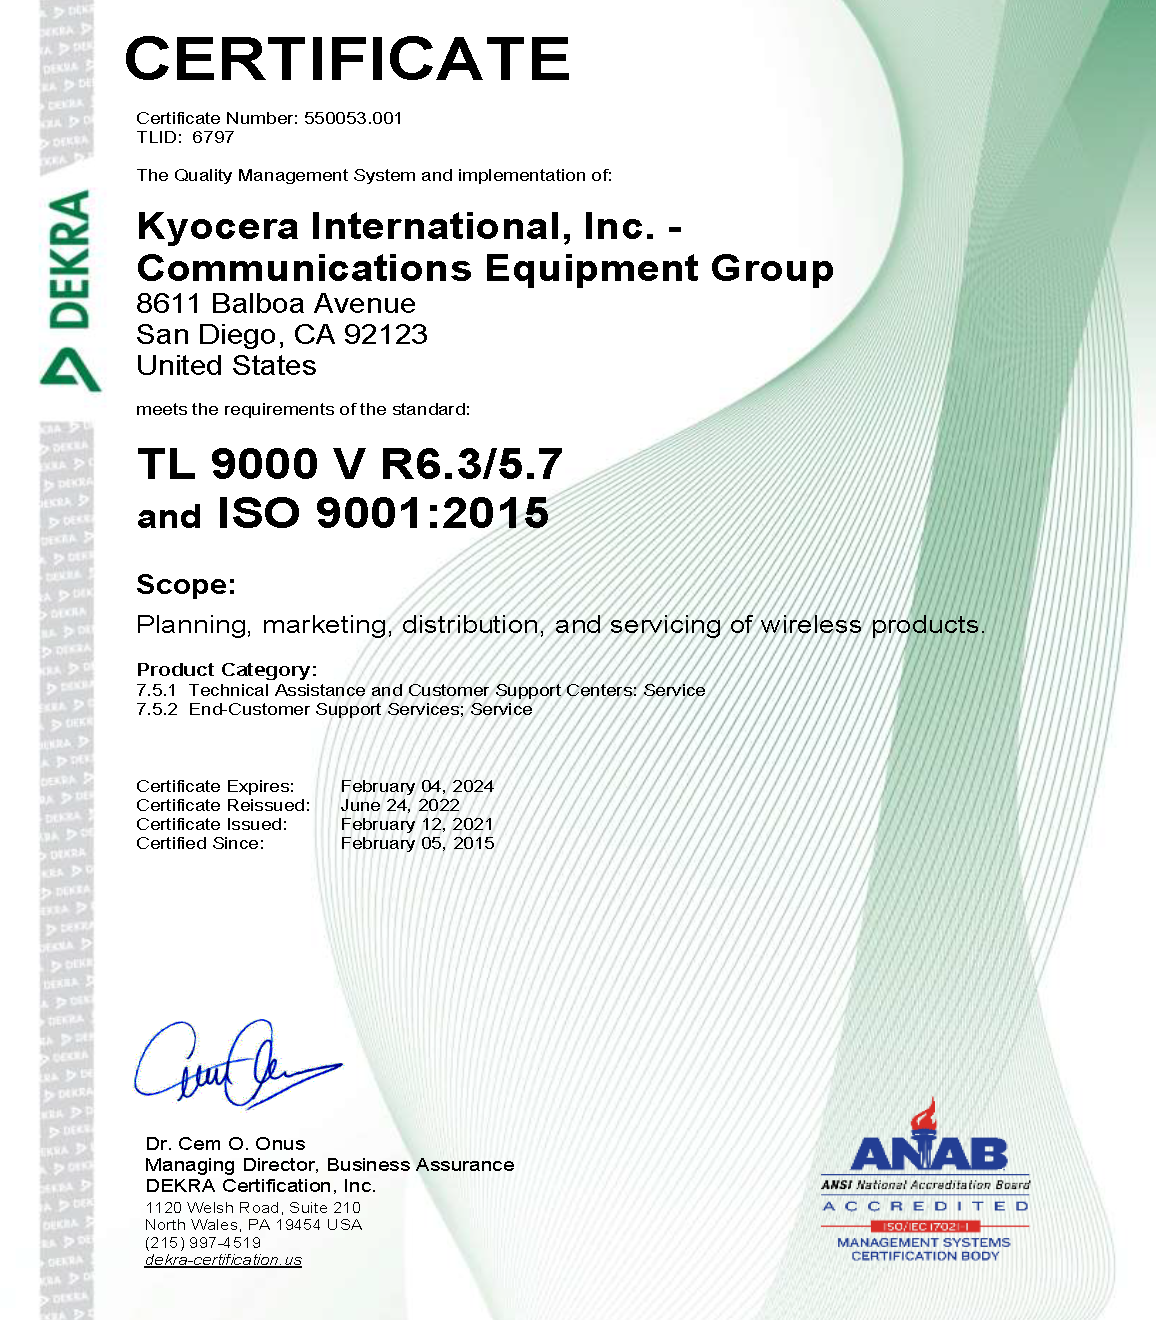 A certificate for kyocera international inc. communications equipment group